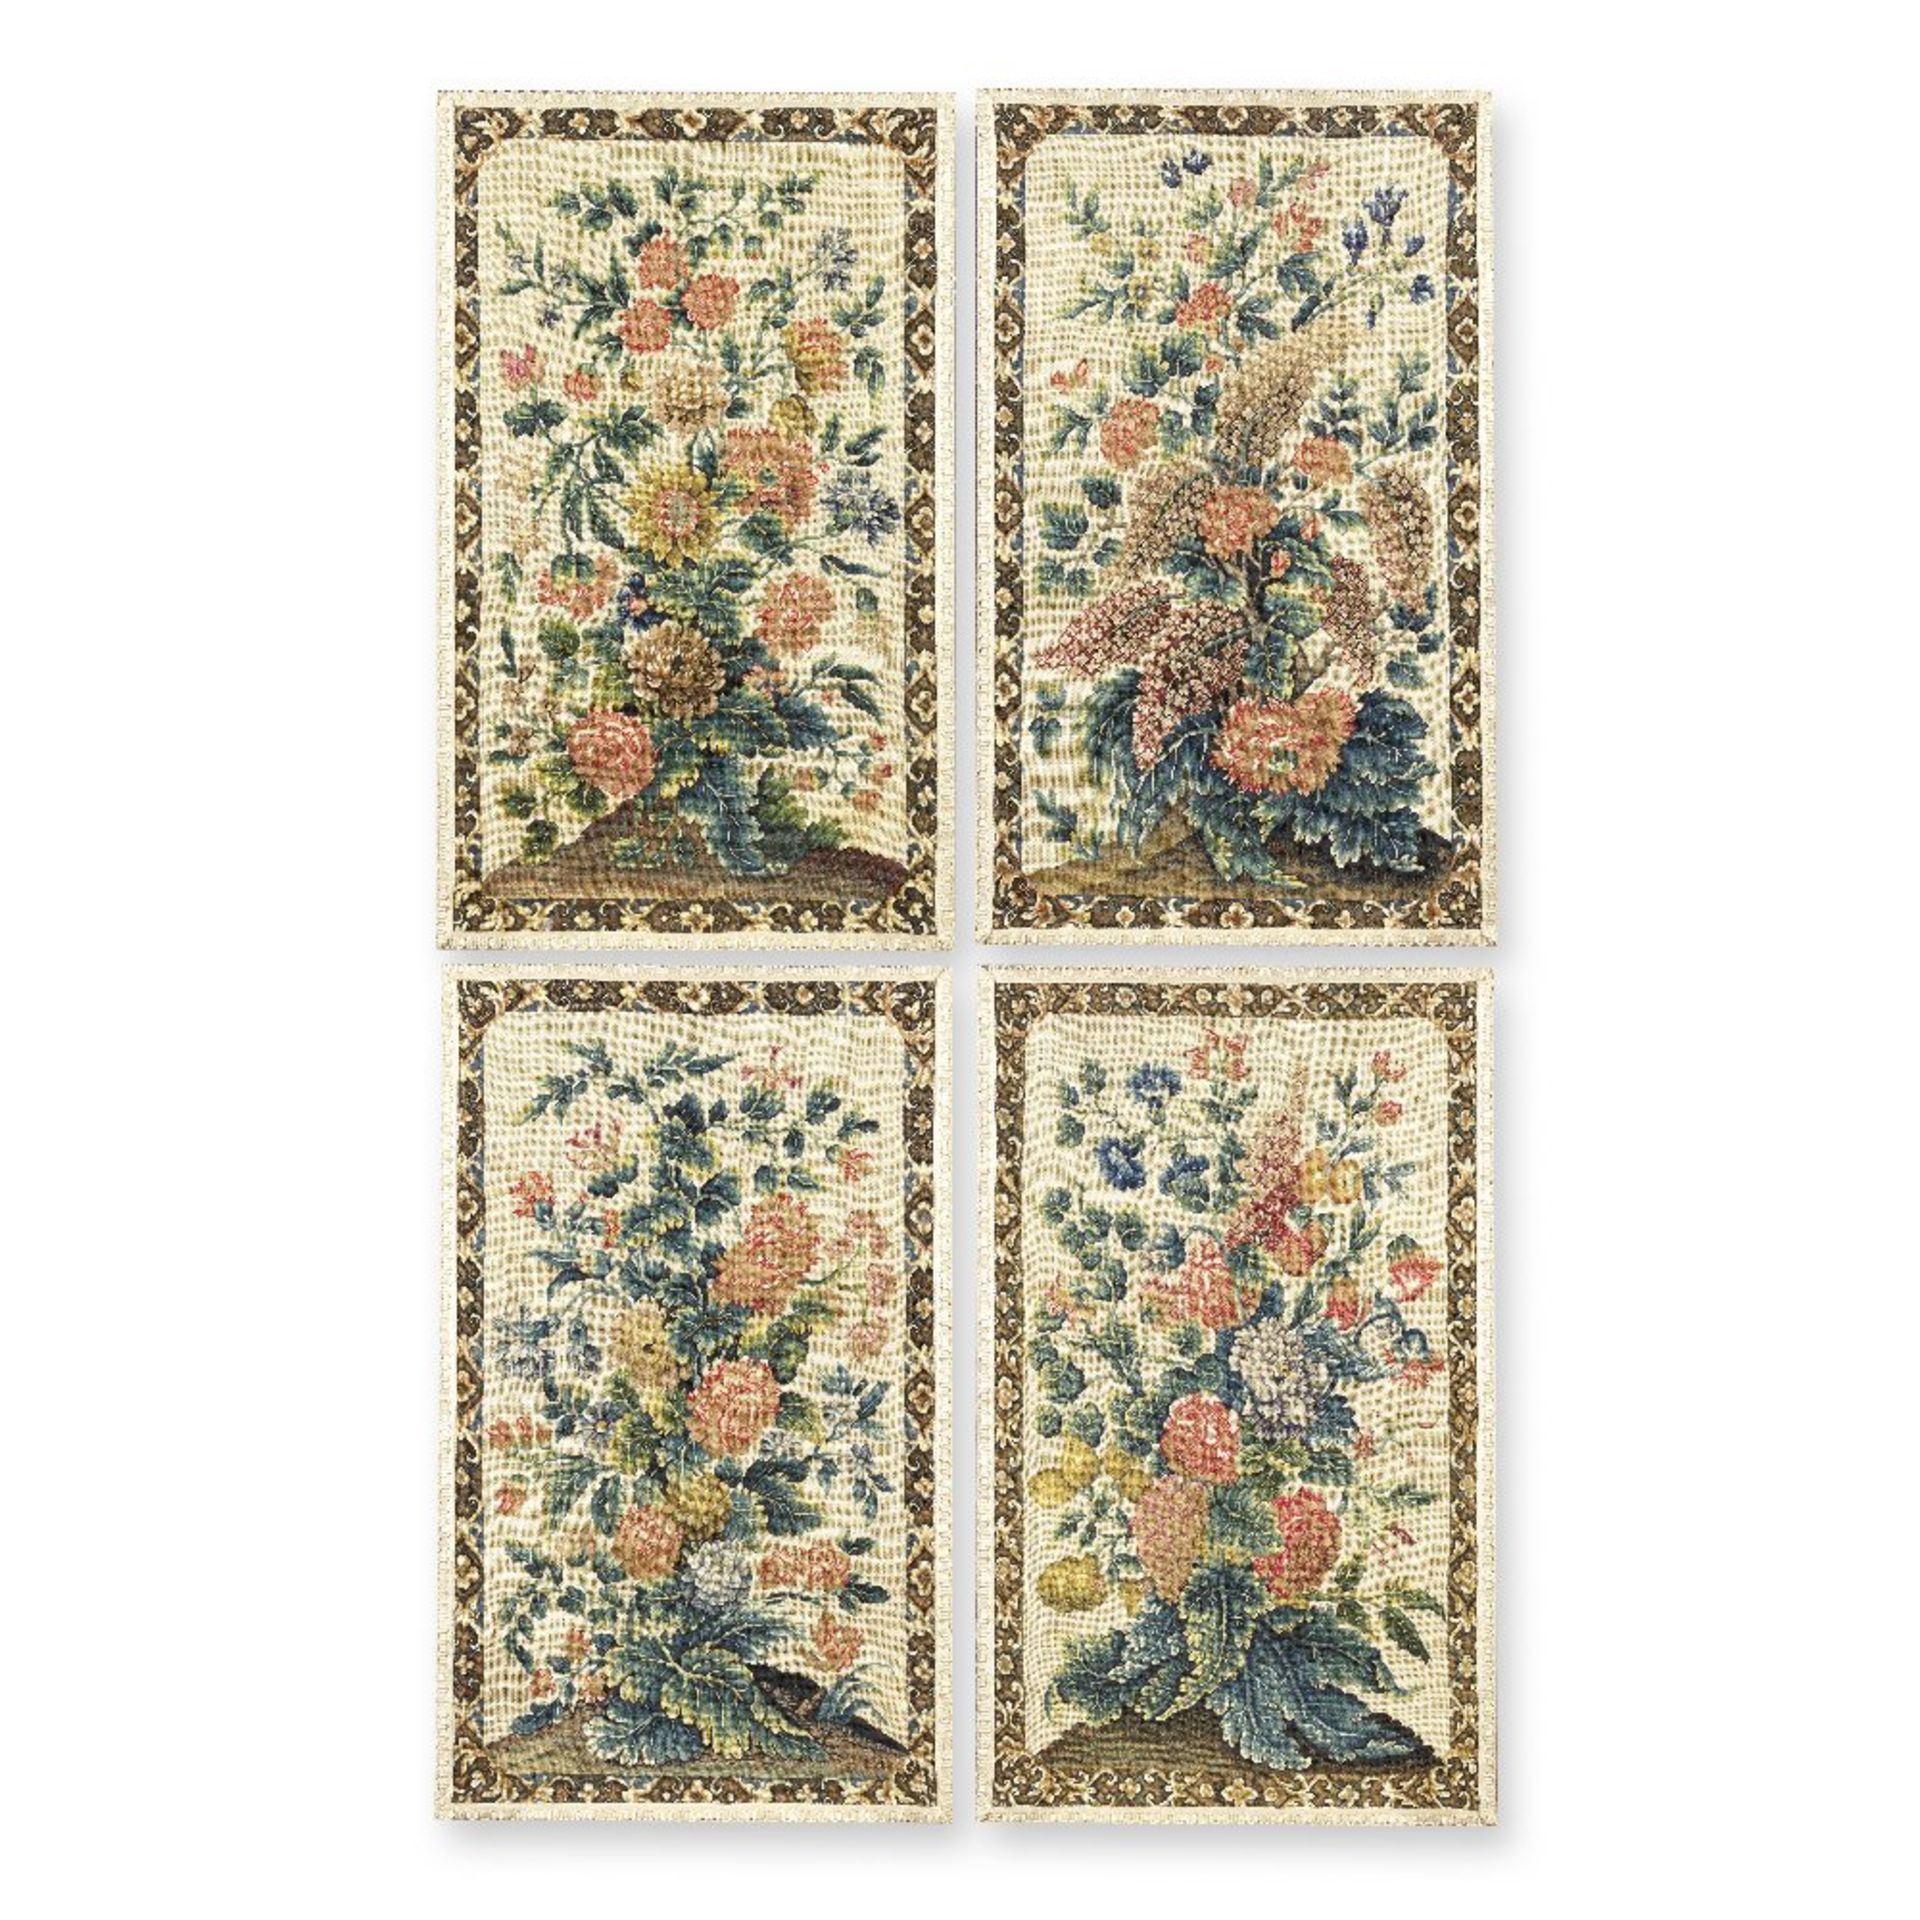 A set of four needlework panels Mid-18th century, French